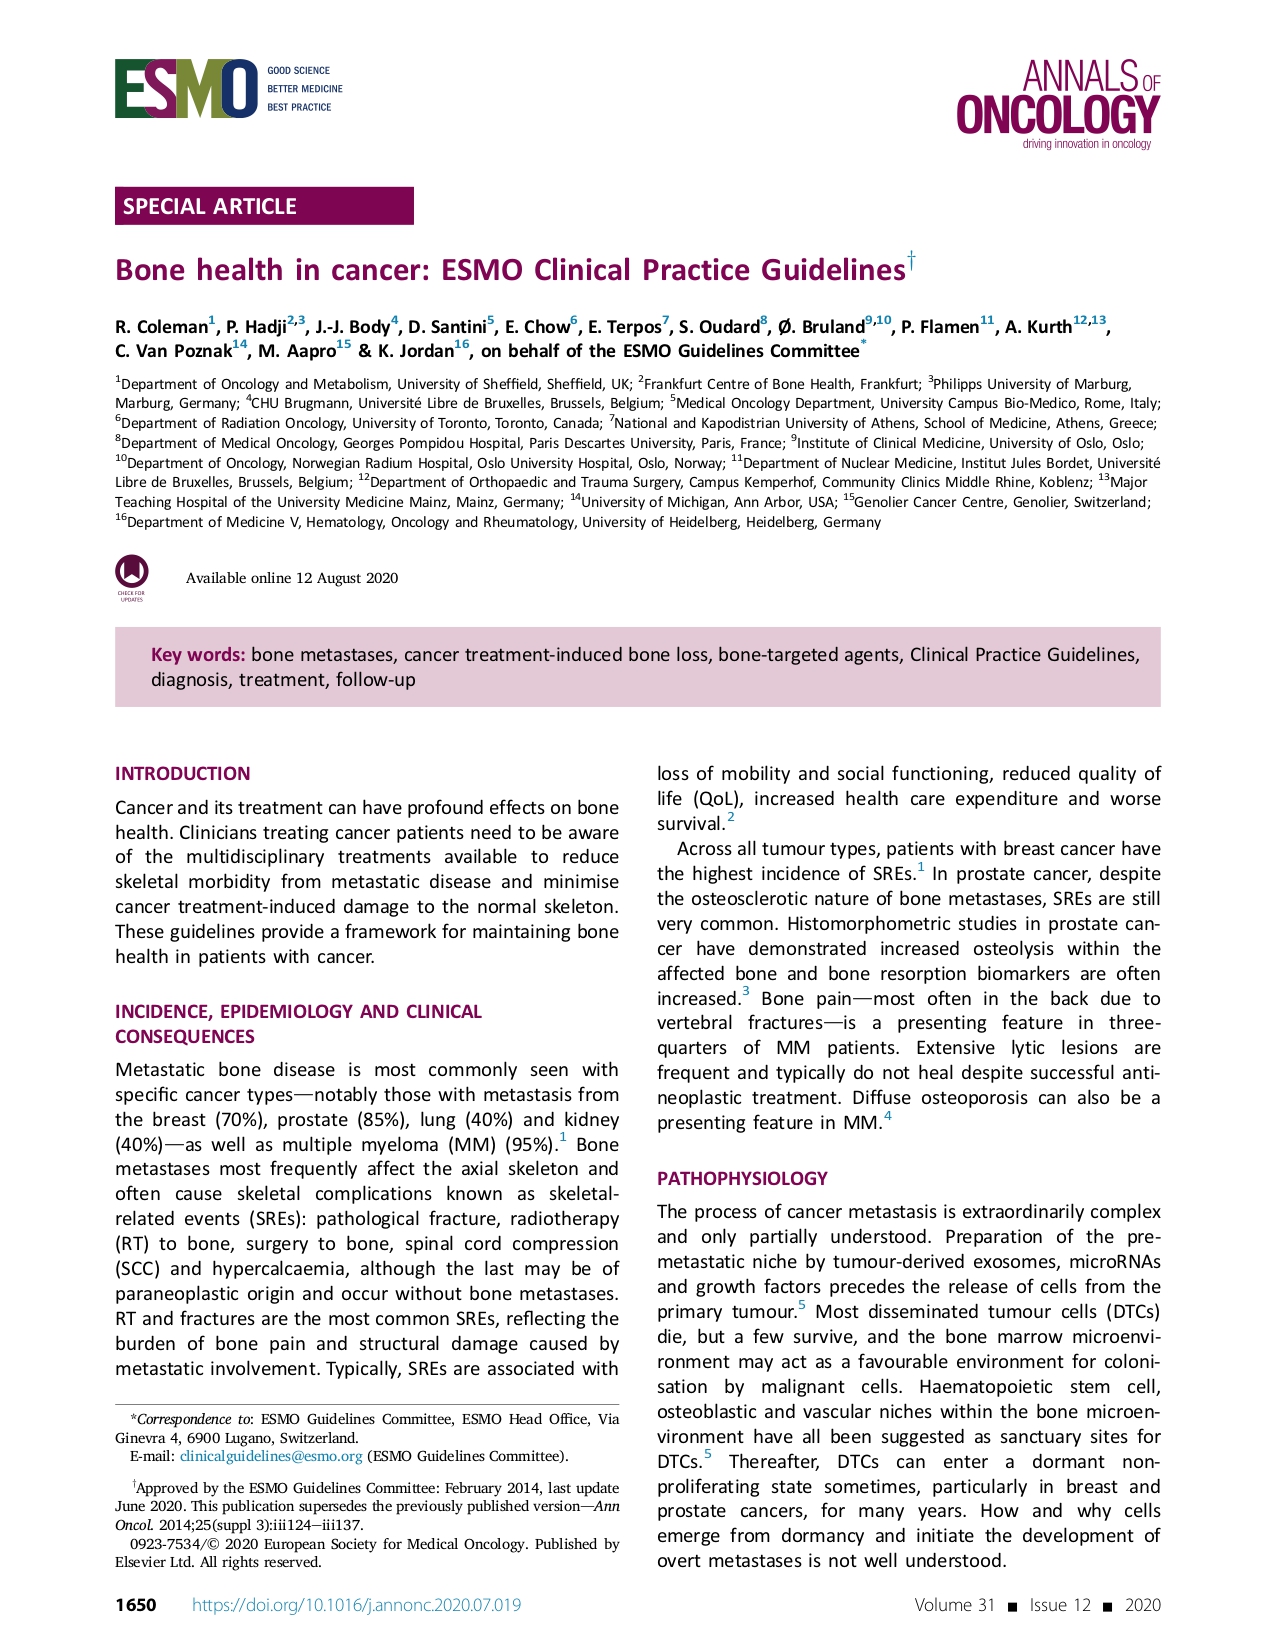 Bone health in cancer: ESMO Clinical Practice Guidelines (2020)